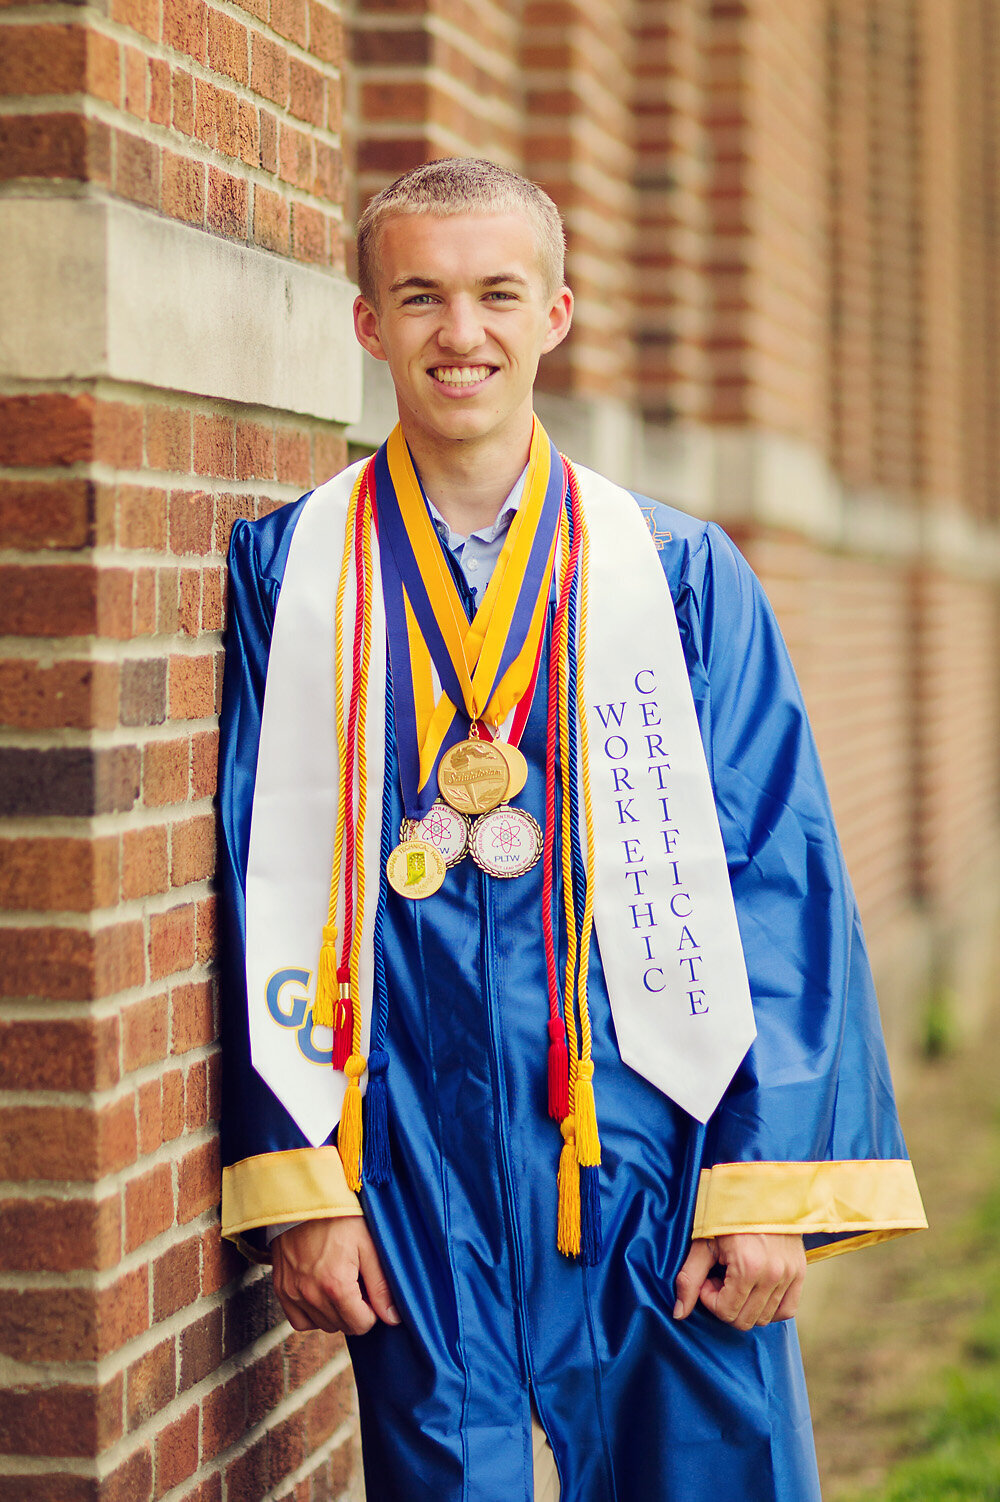 Connor in his high school gown and medals leaning against brick.